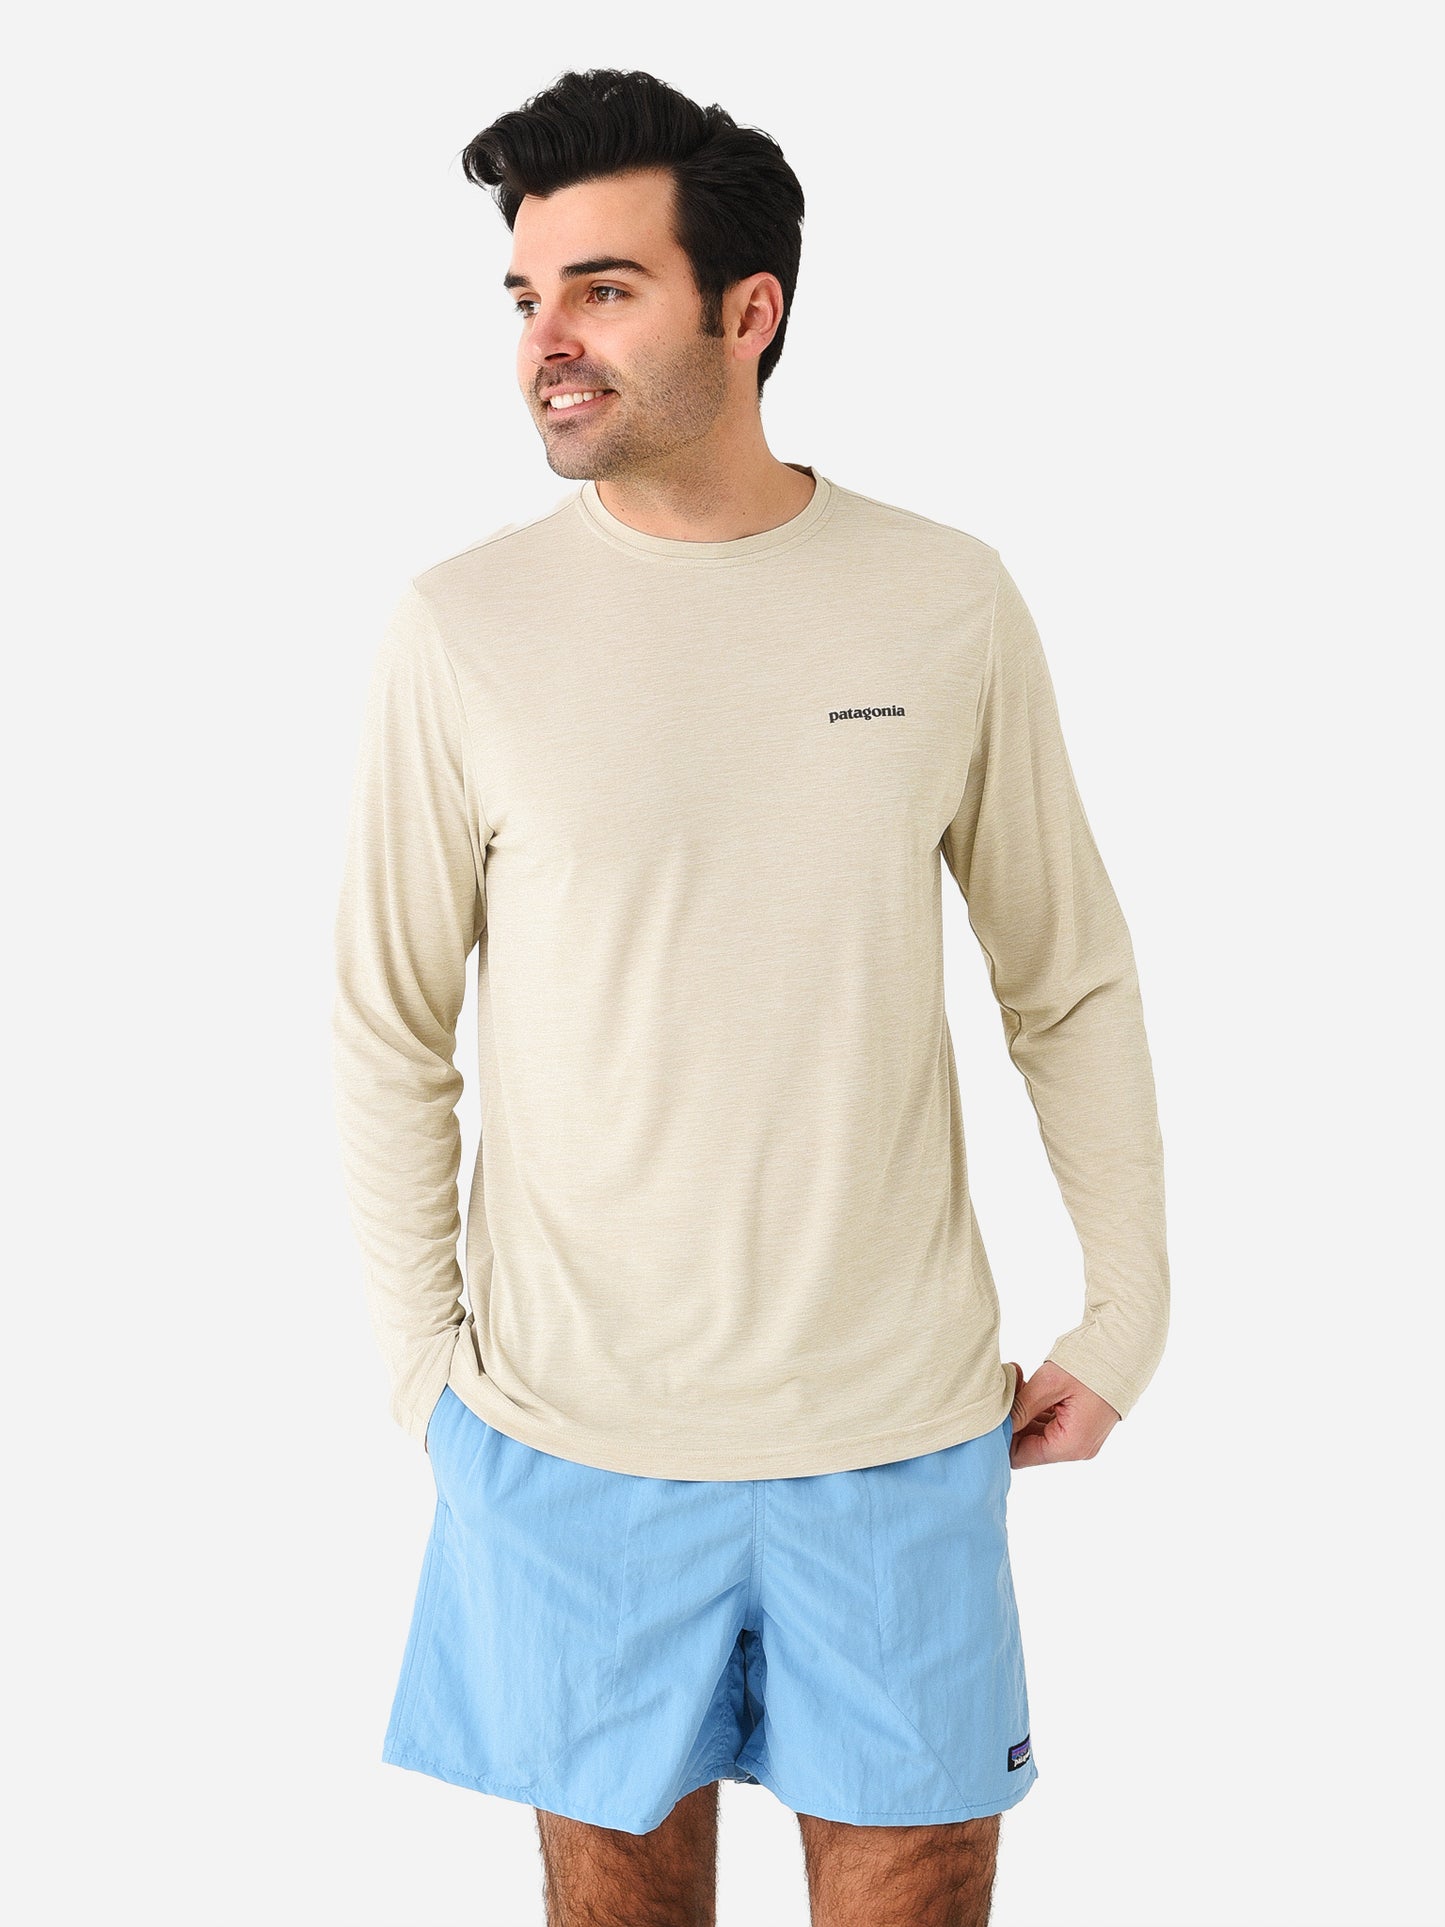 Patagonia Men's Long Sleeve Capilene Cool Daily Fish Graphic Tee